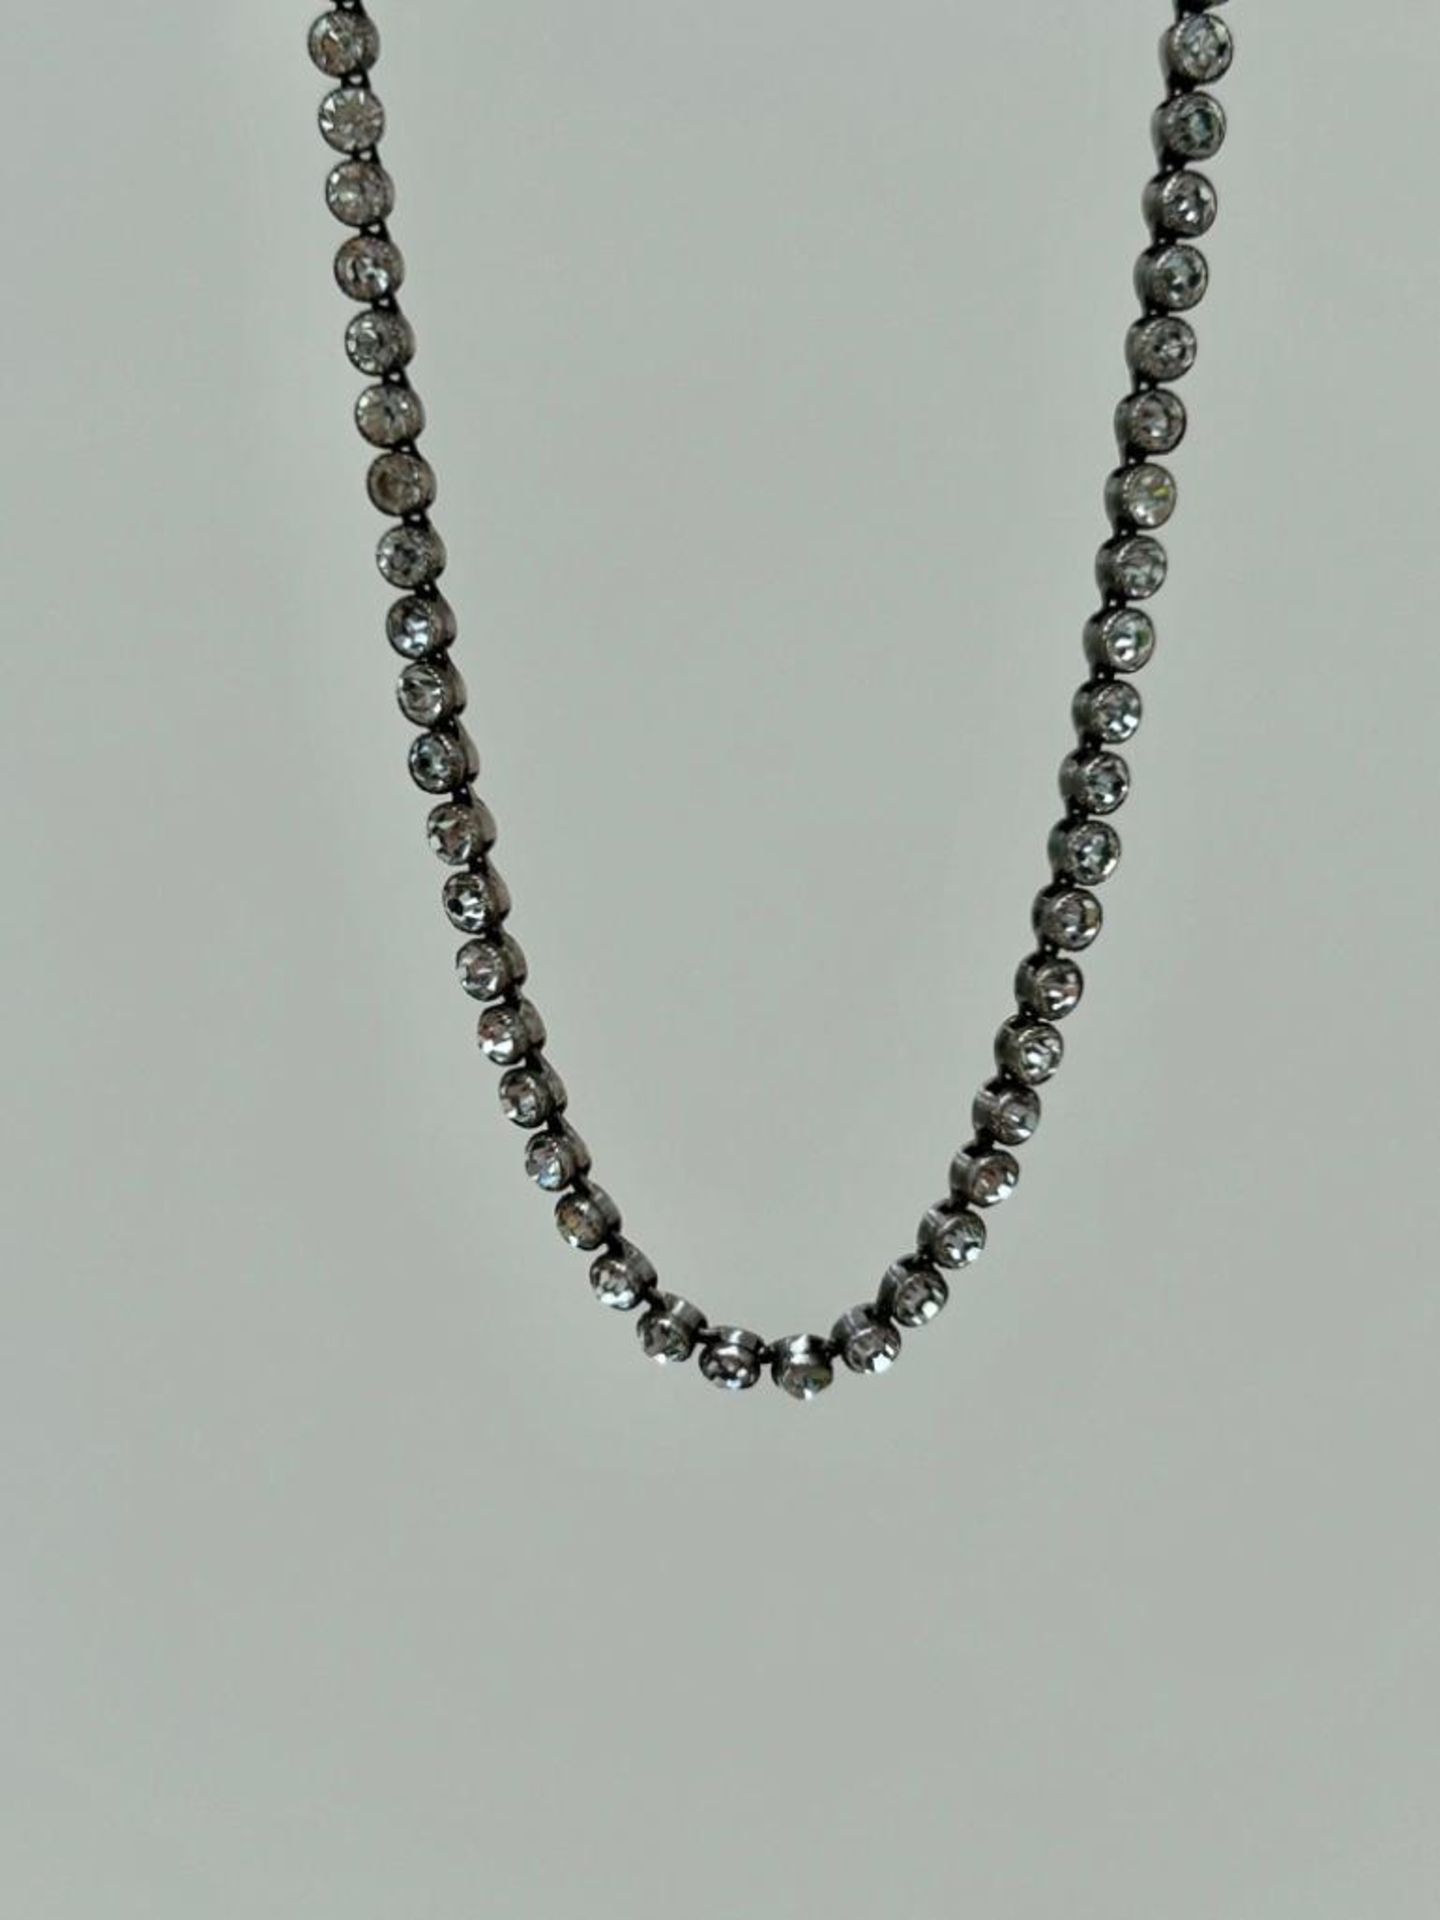 Wonderful Paste Riviere Necklace Silver - Image 5 of 6